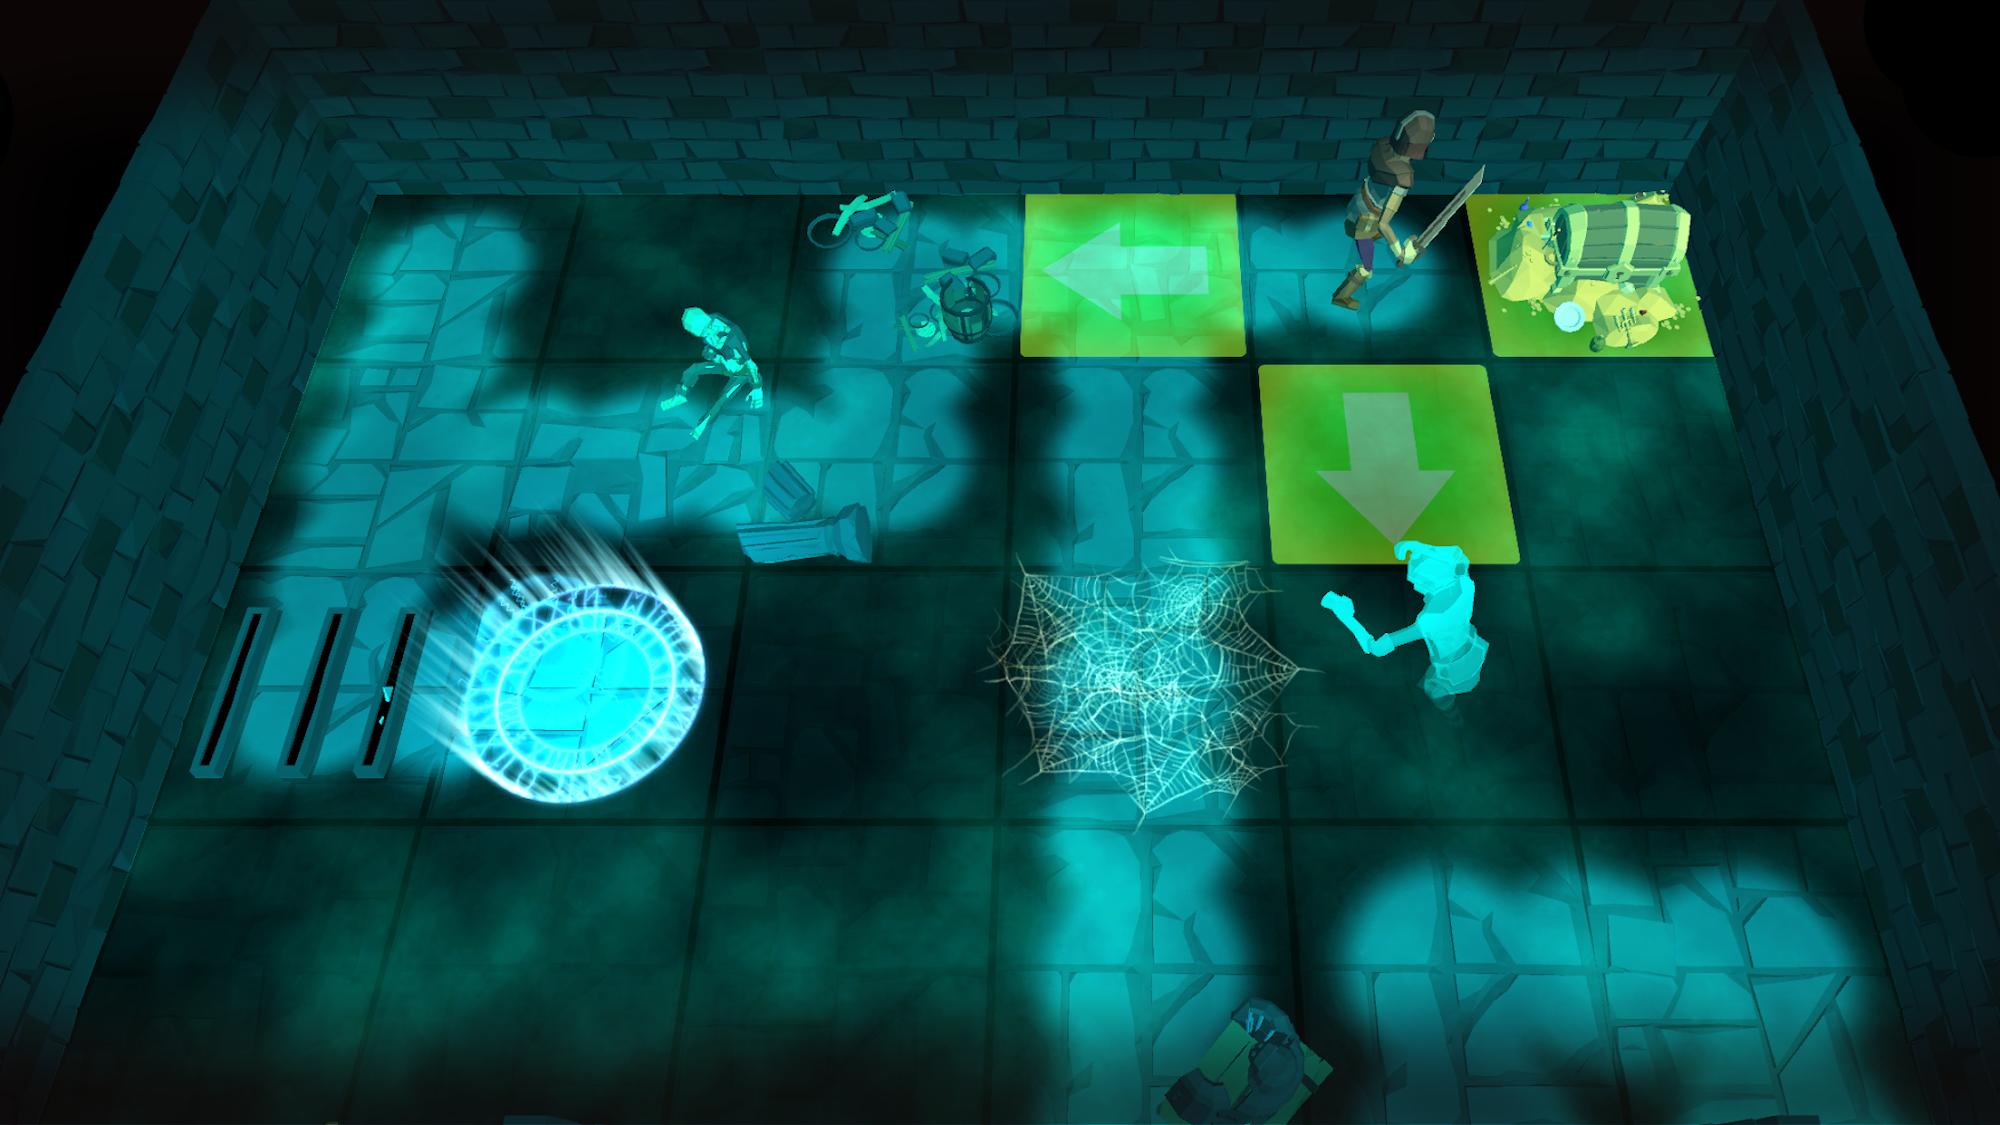 Into the Dungeon - Turn Based Tactical RPG Games for Android